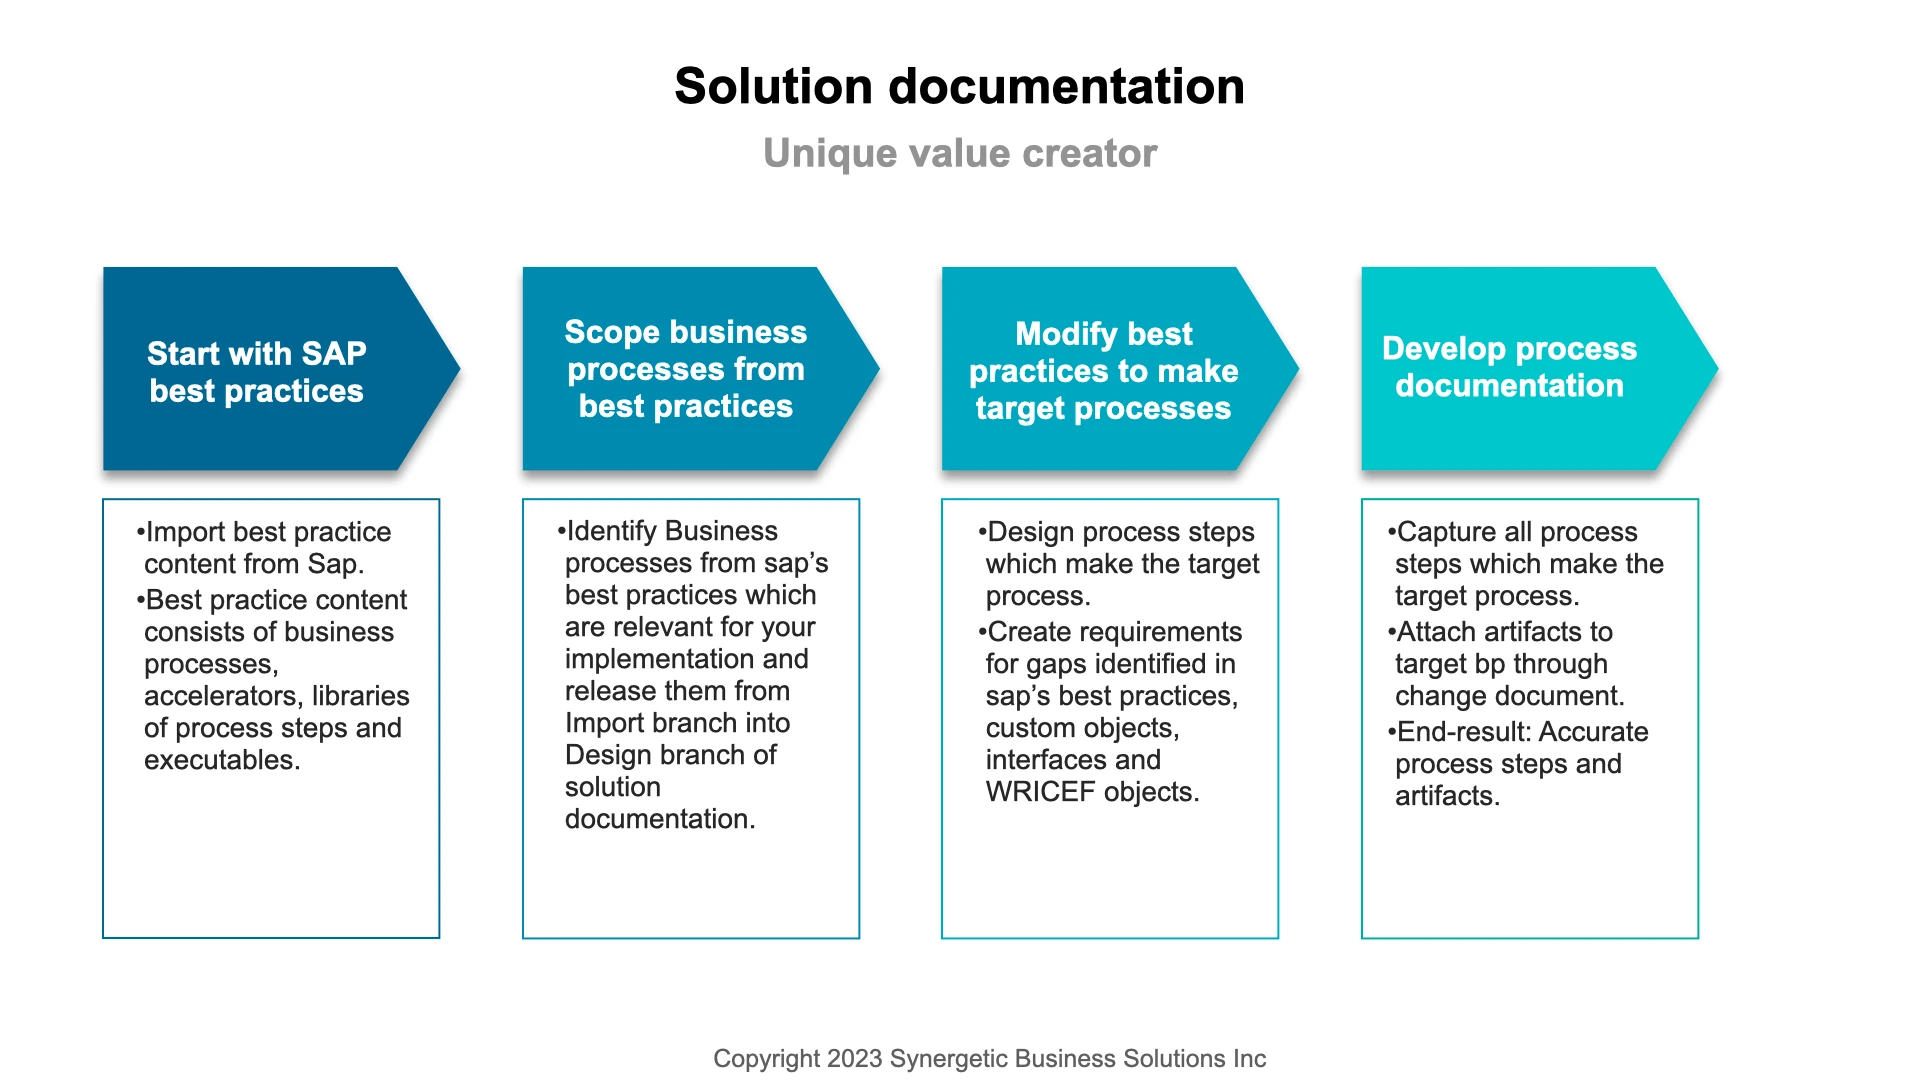 Recommended approach for Solution Documentation